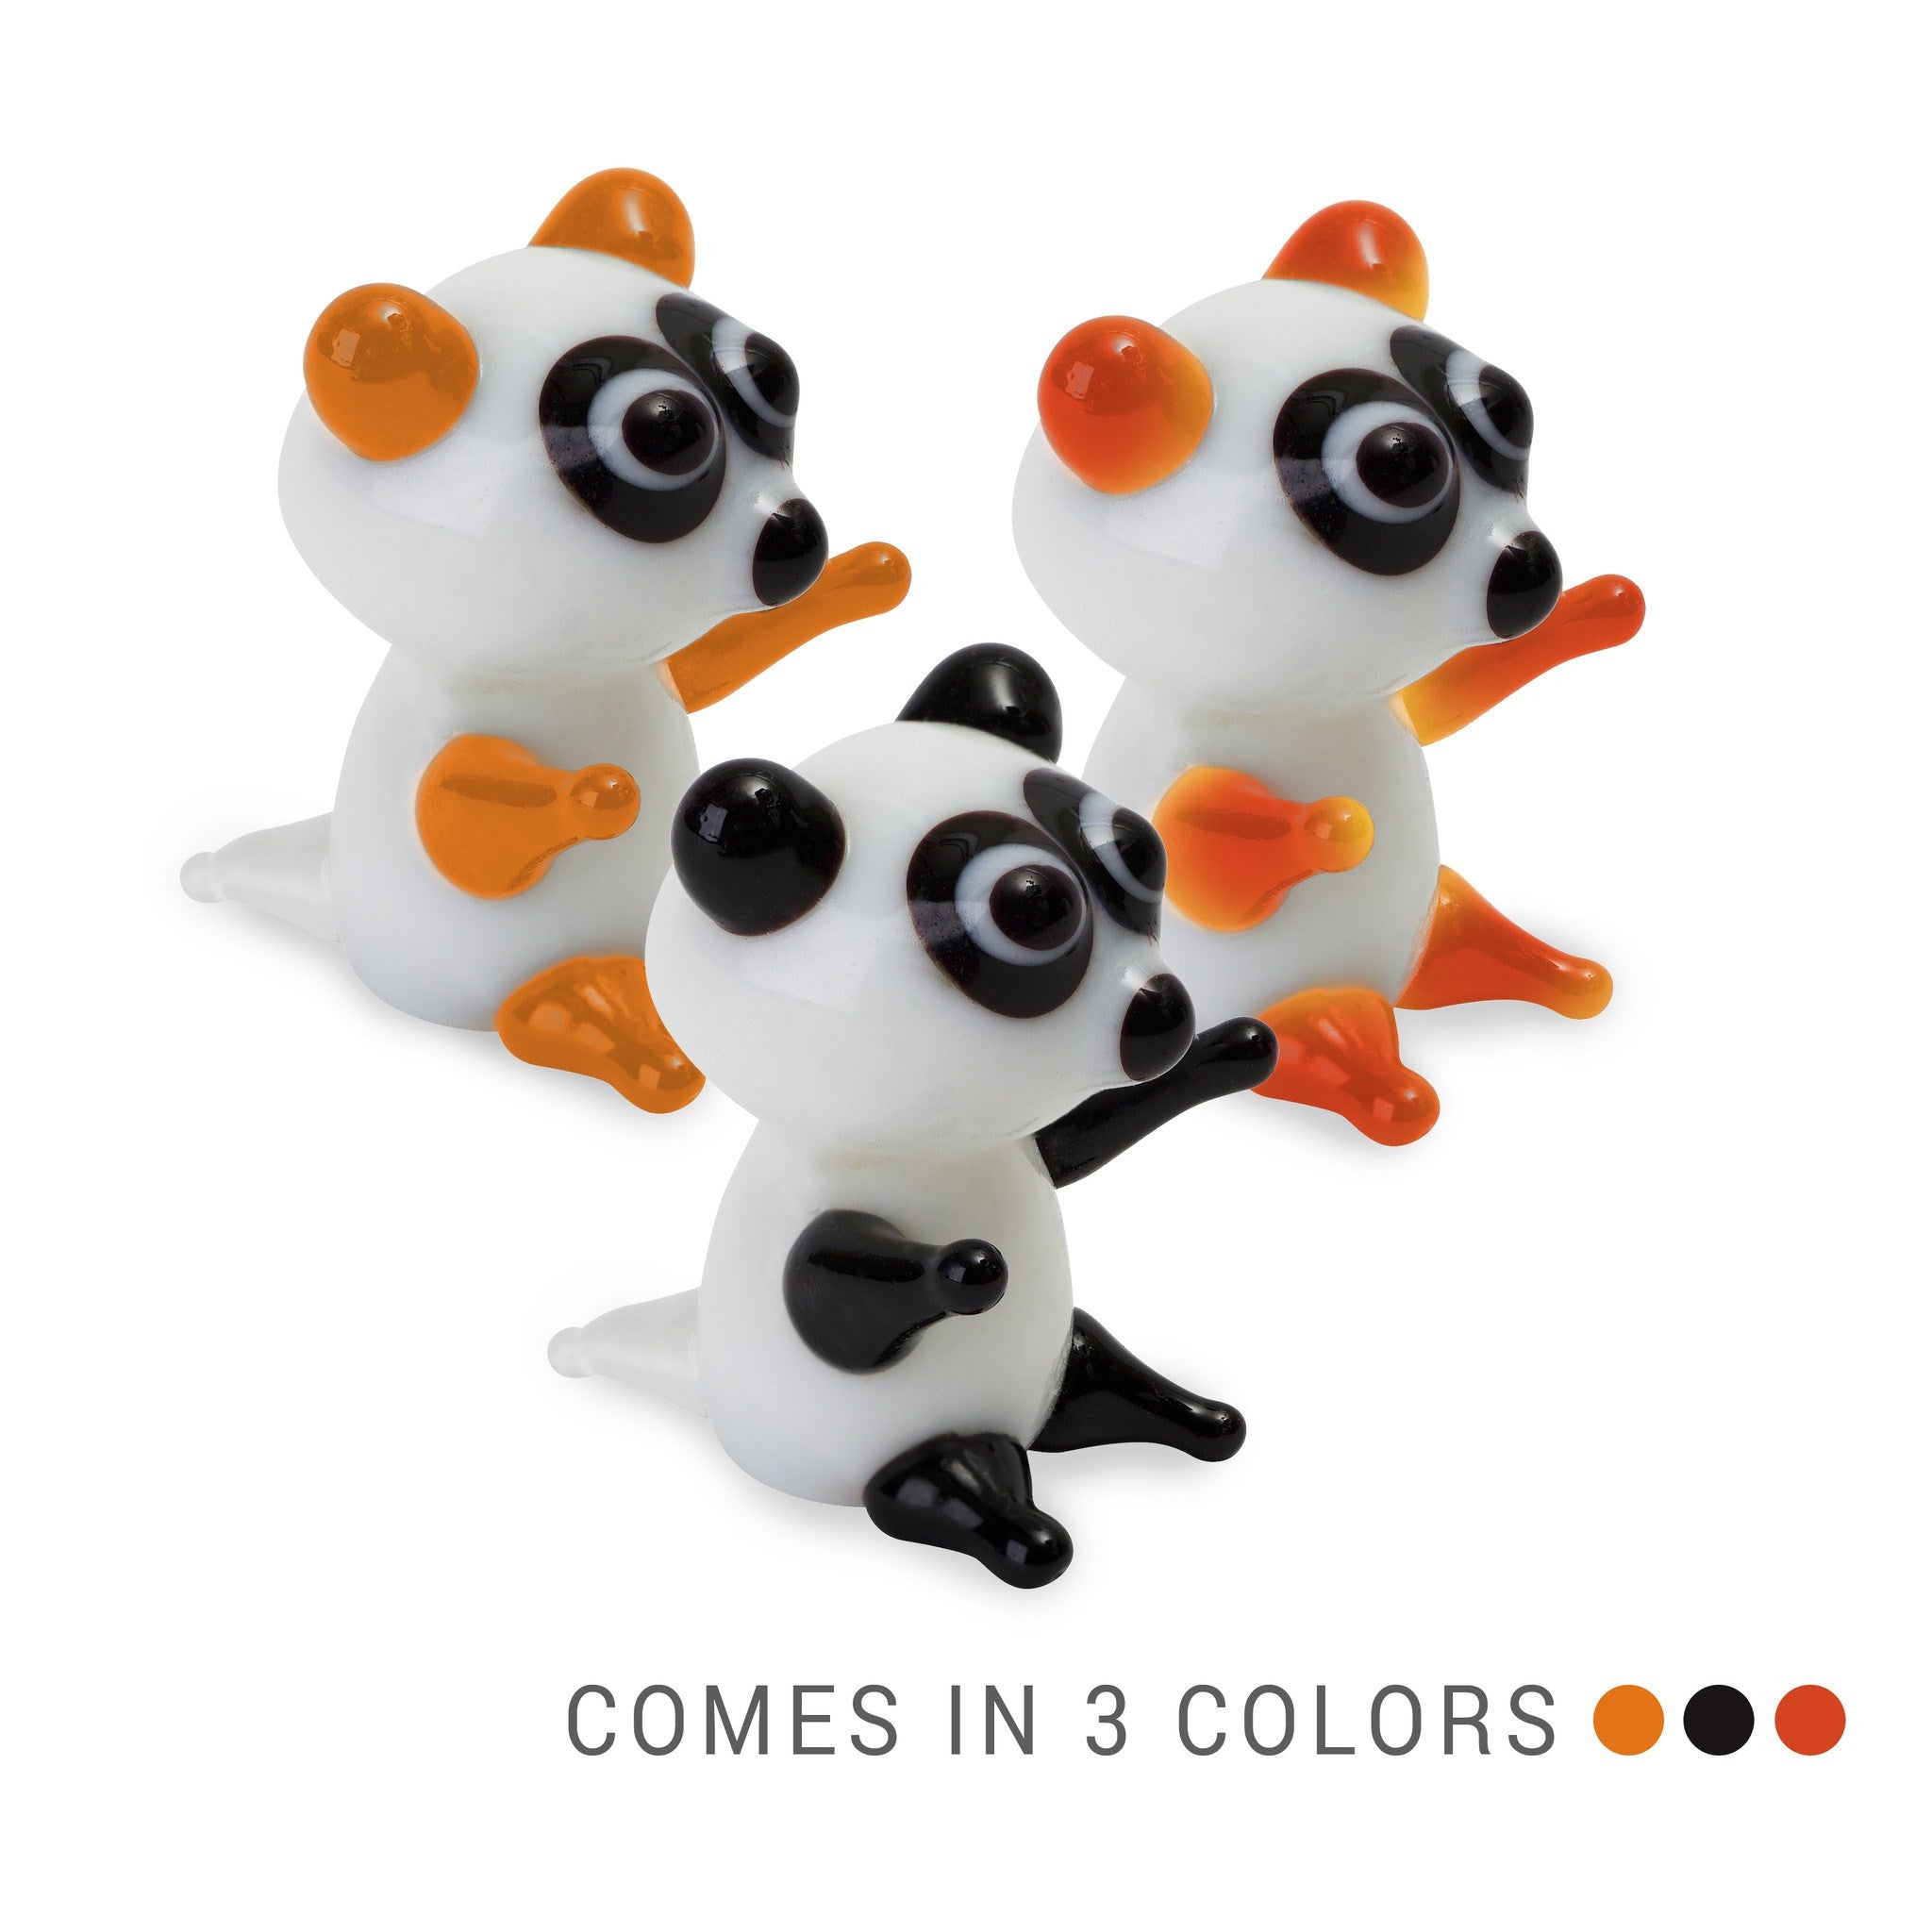 ONO the raccoon (in Tynies Collector's Frame) Miniature glass figurines 